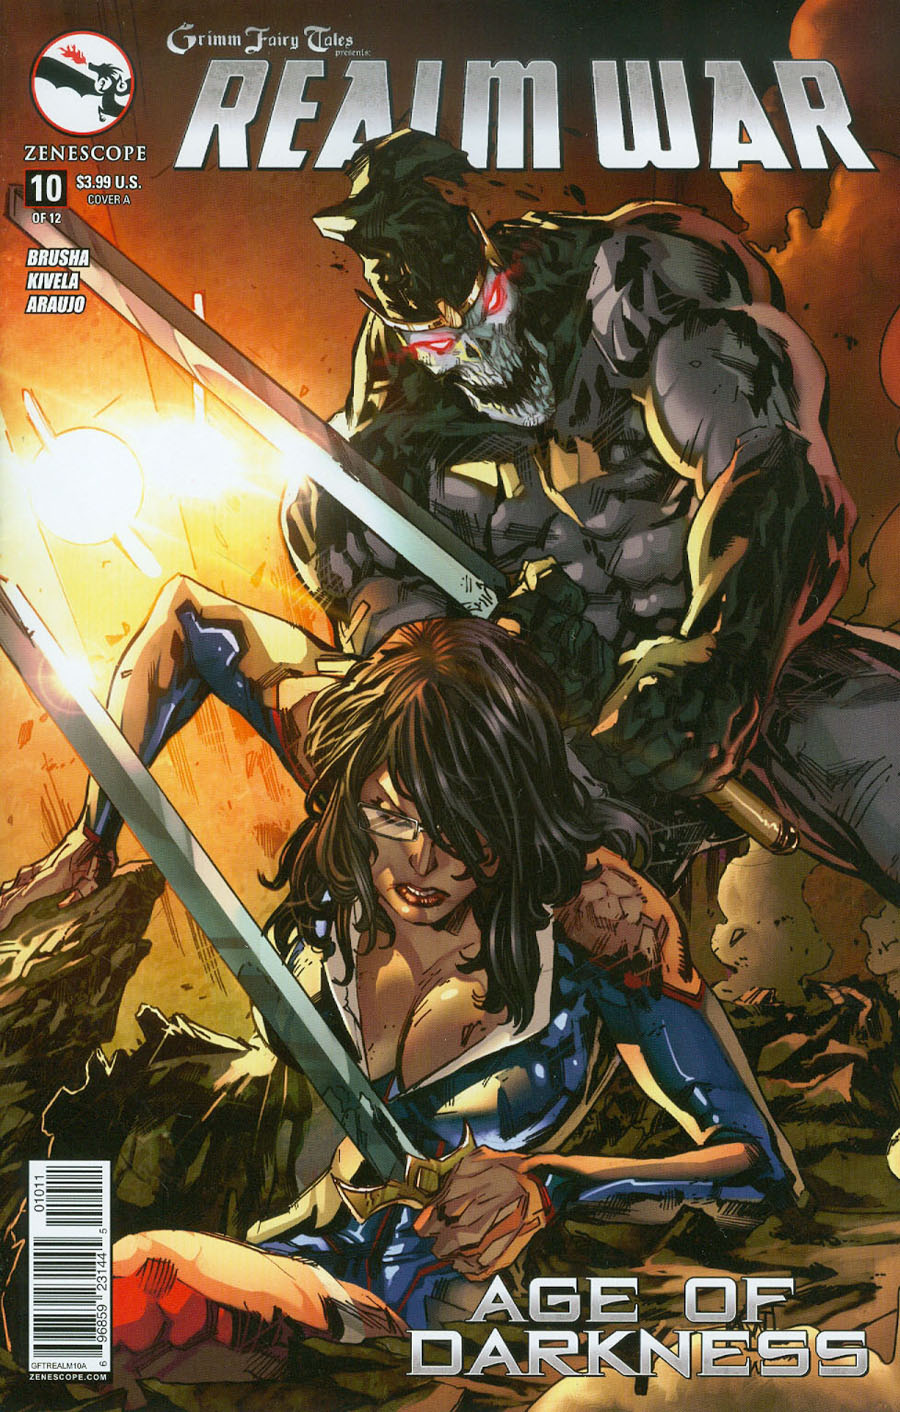 Grimm Fairy Tales Presents Realm War #10 Cover A Ken Lashley (Age Of Darkness Tie-In)